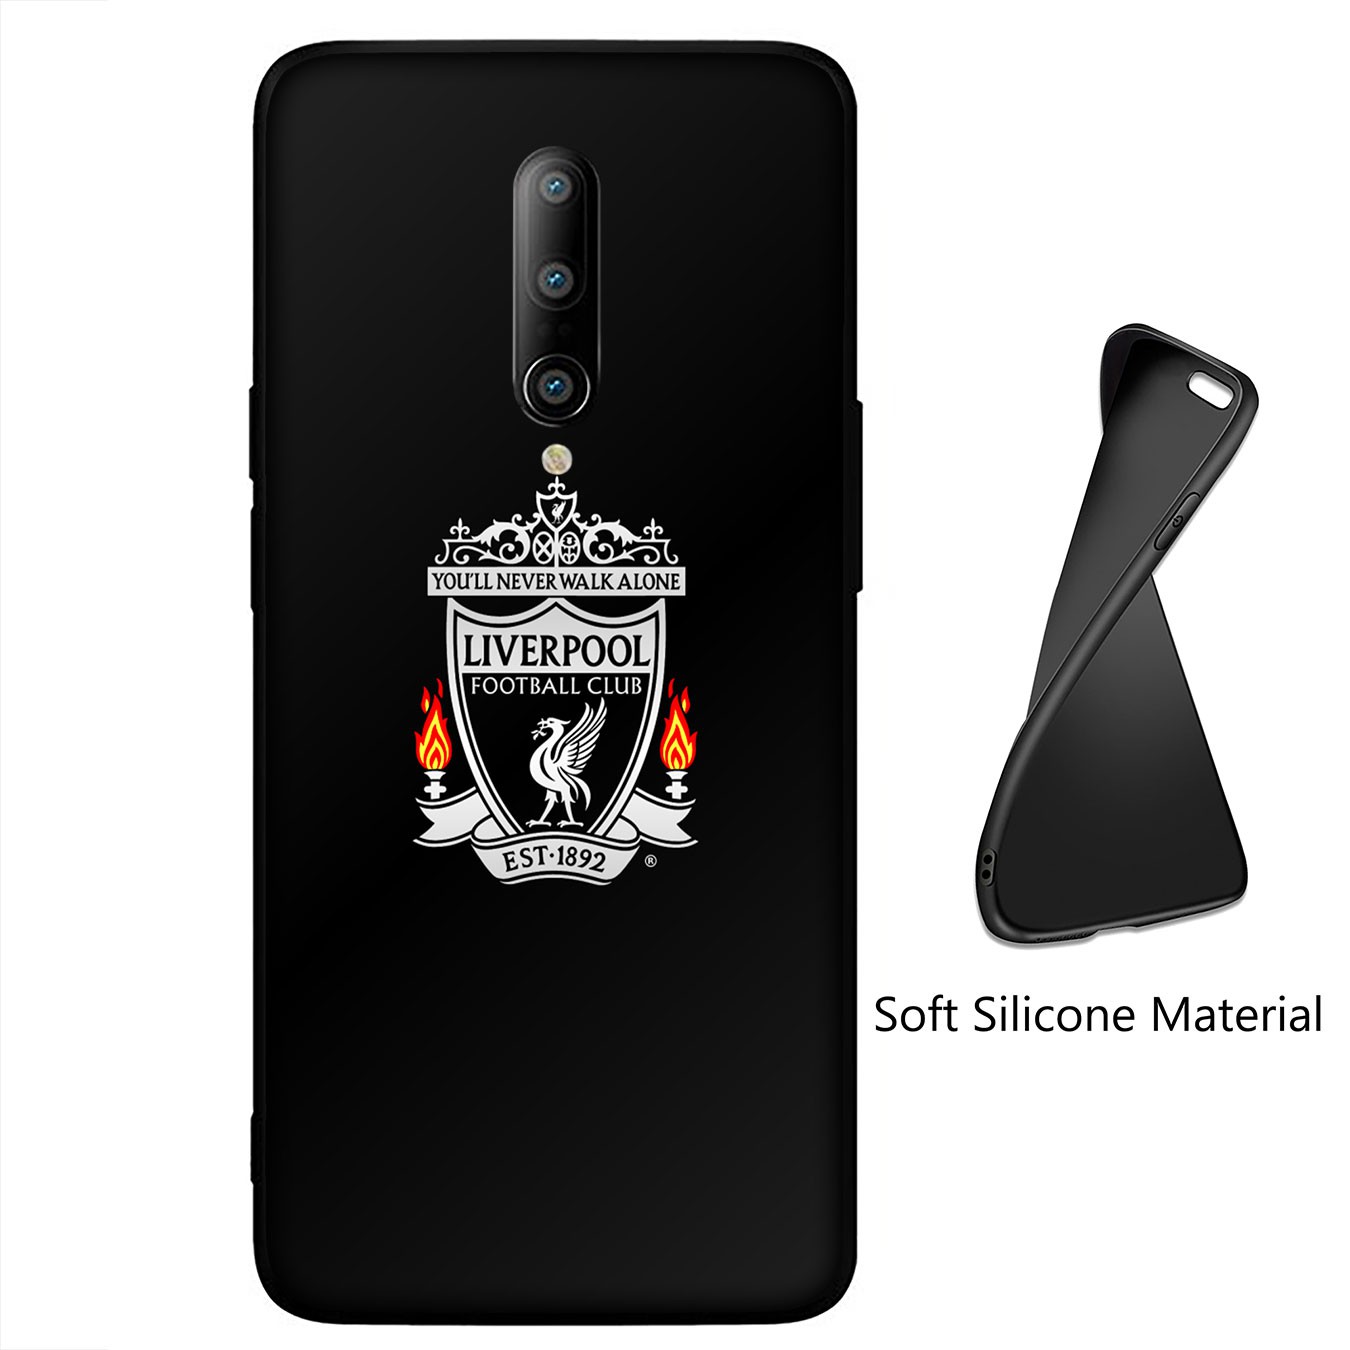 iPhone 12 Mini 11 Max Pro SE 2020 XR Phone Case Soft Silicone Casing logo Liverpool Football